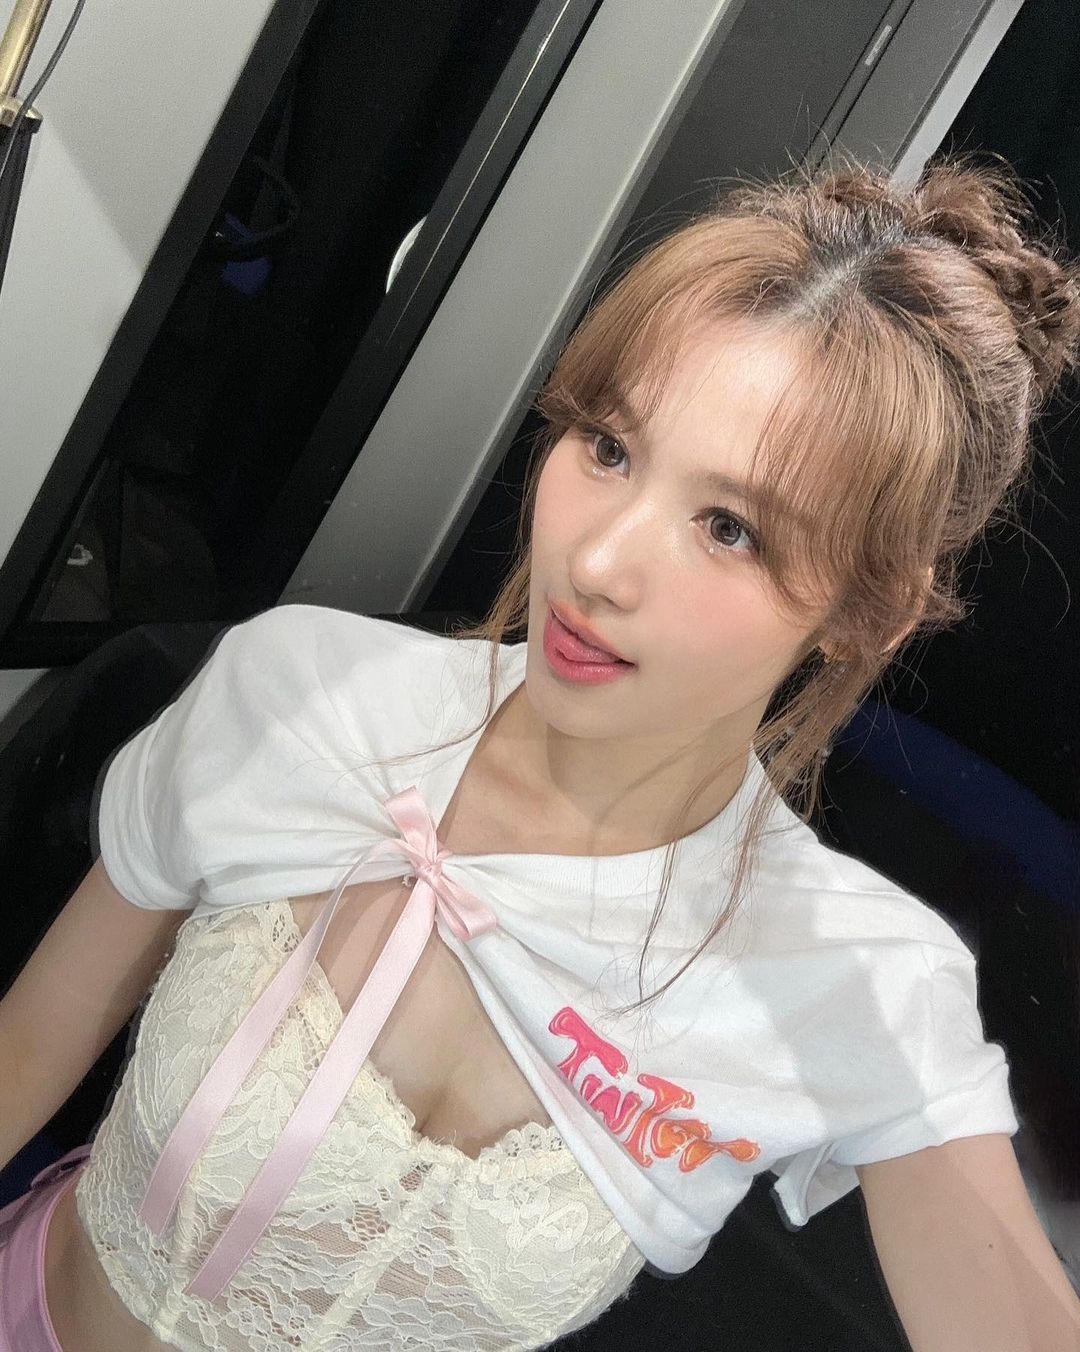 TWICE Sana shows off her volume with bold lingerie fashion